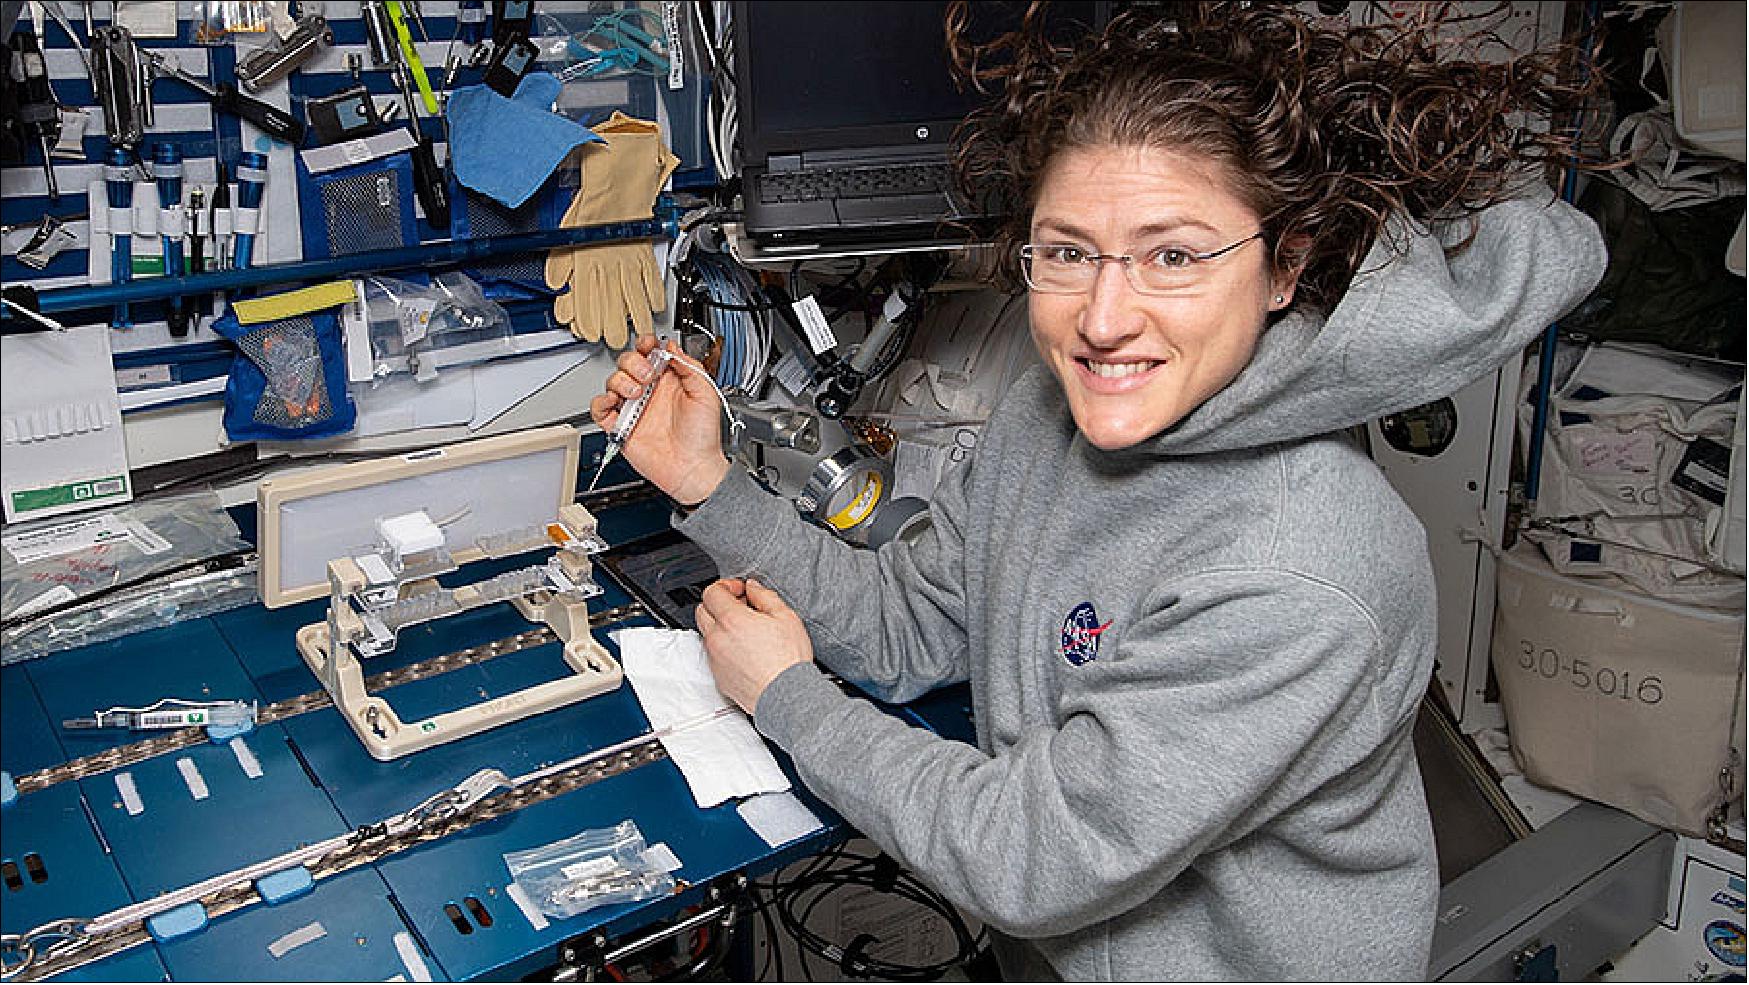 Figure 80: NASA astronaut Christina Koch works on the Capillary Structures experiment studying how to manage fluid and gas mixtures for more reliable life support systems in space (image credit: NASA)